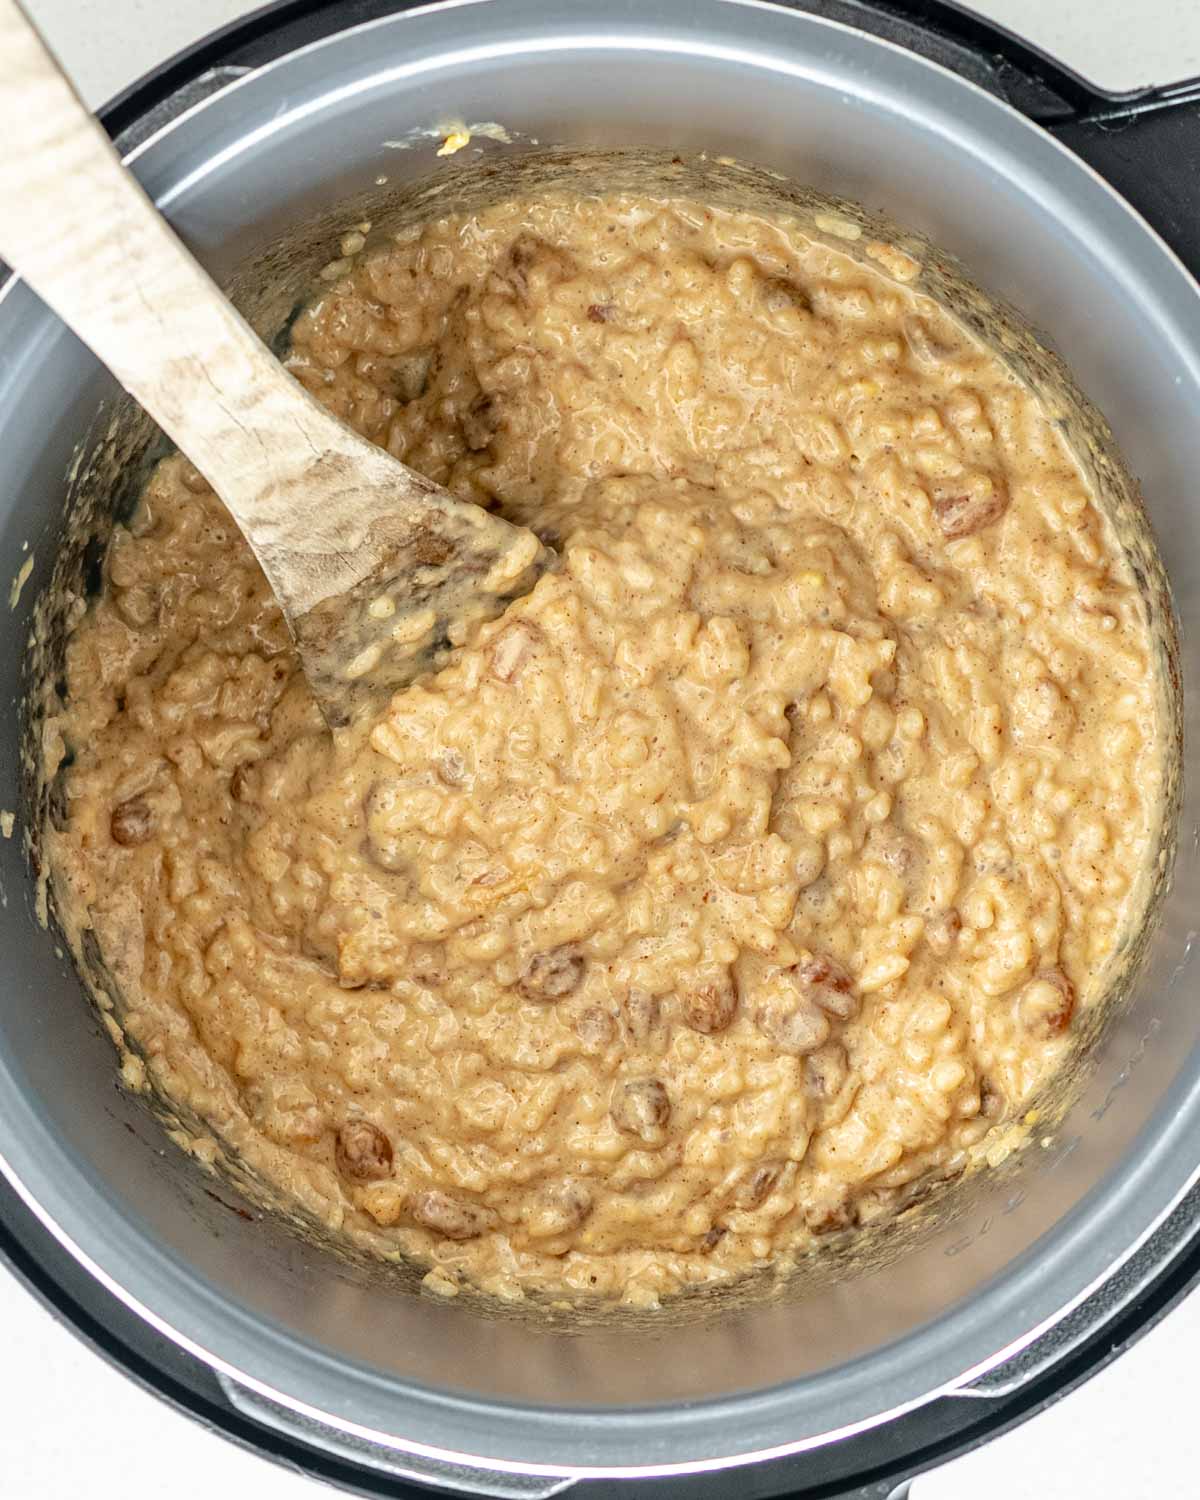 rice pudding freshly made in an instant pot.